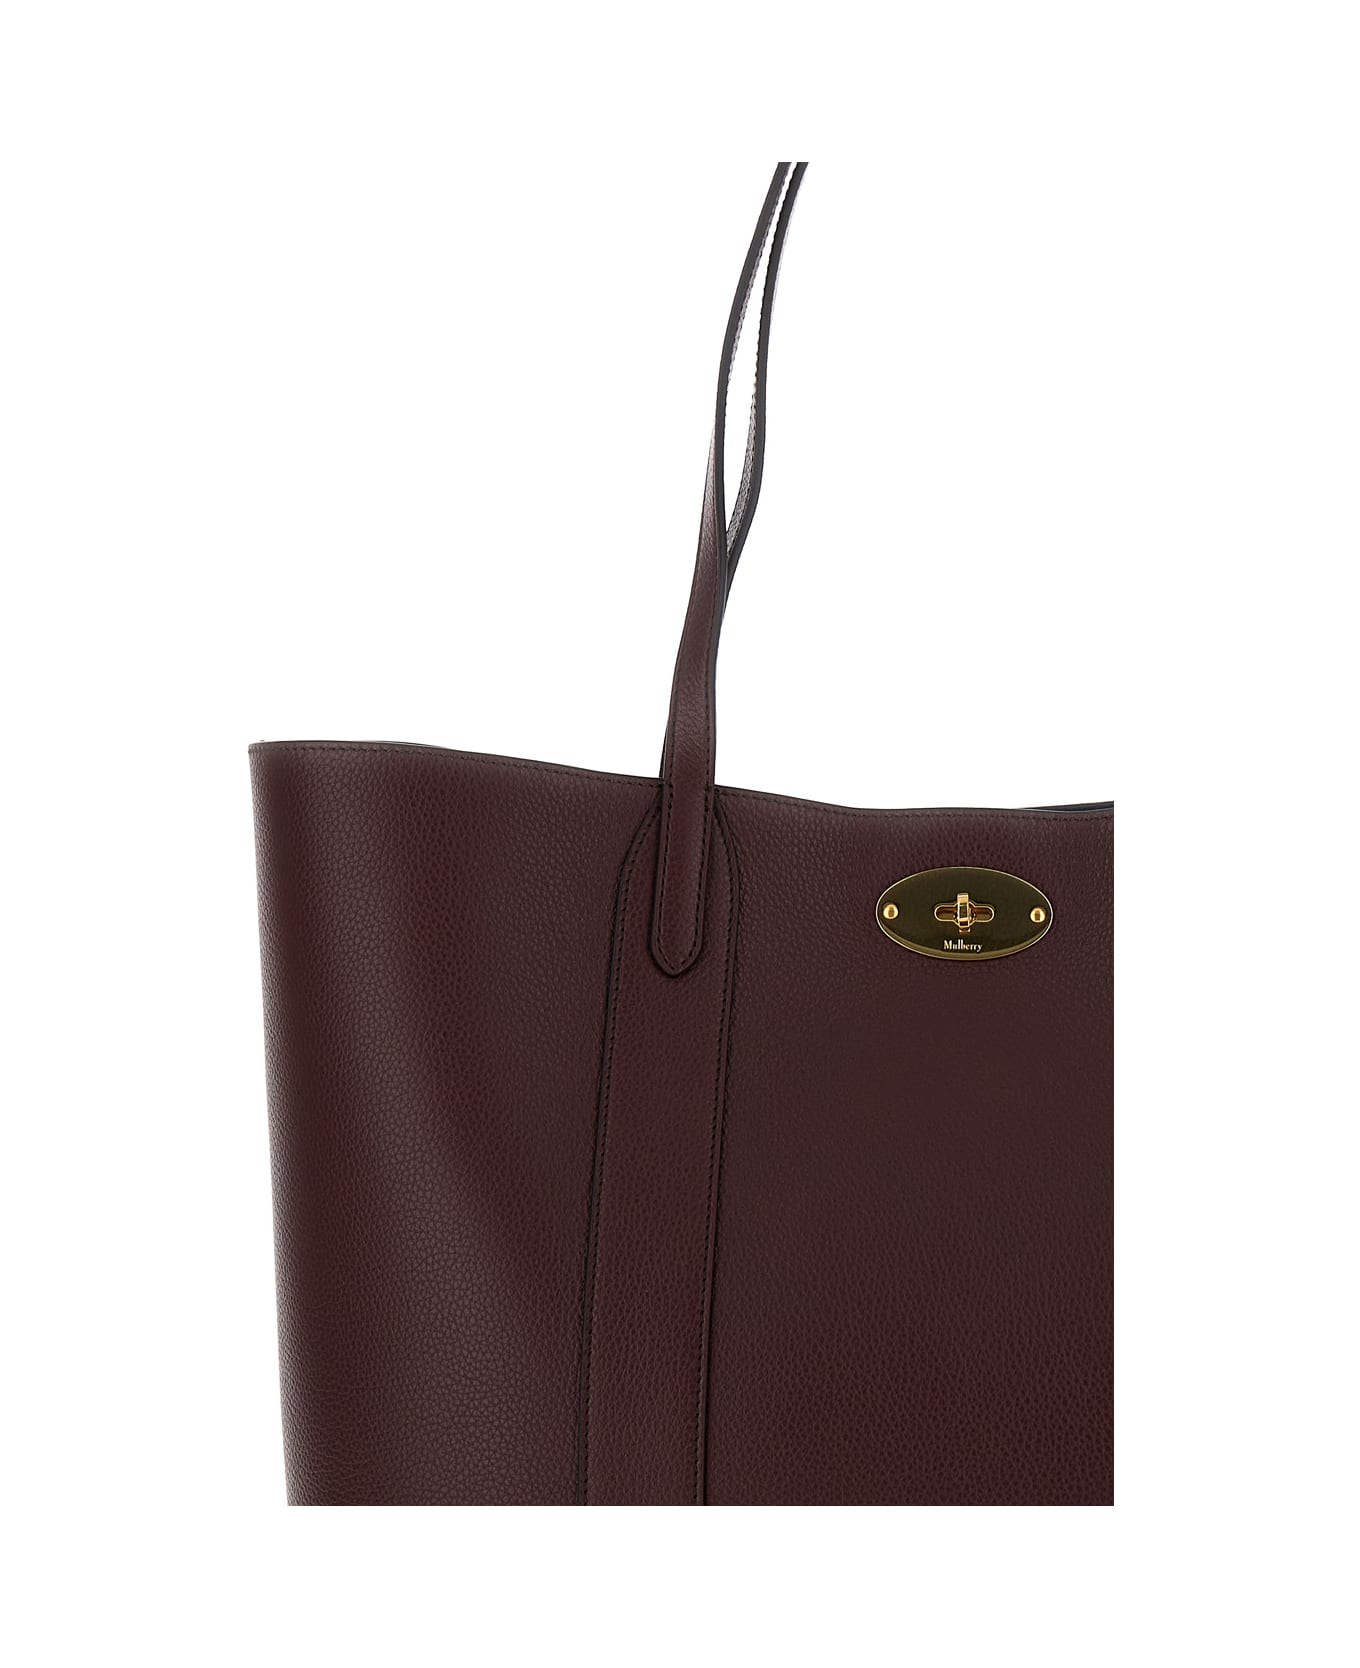 Mulberry Bayswater Tote Small Classic Grain - Bordeaux トートバッグ